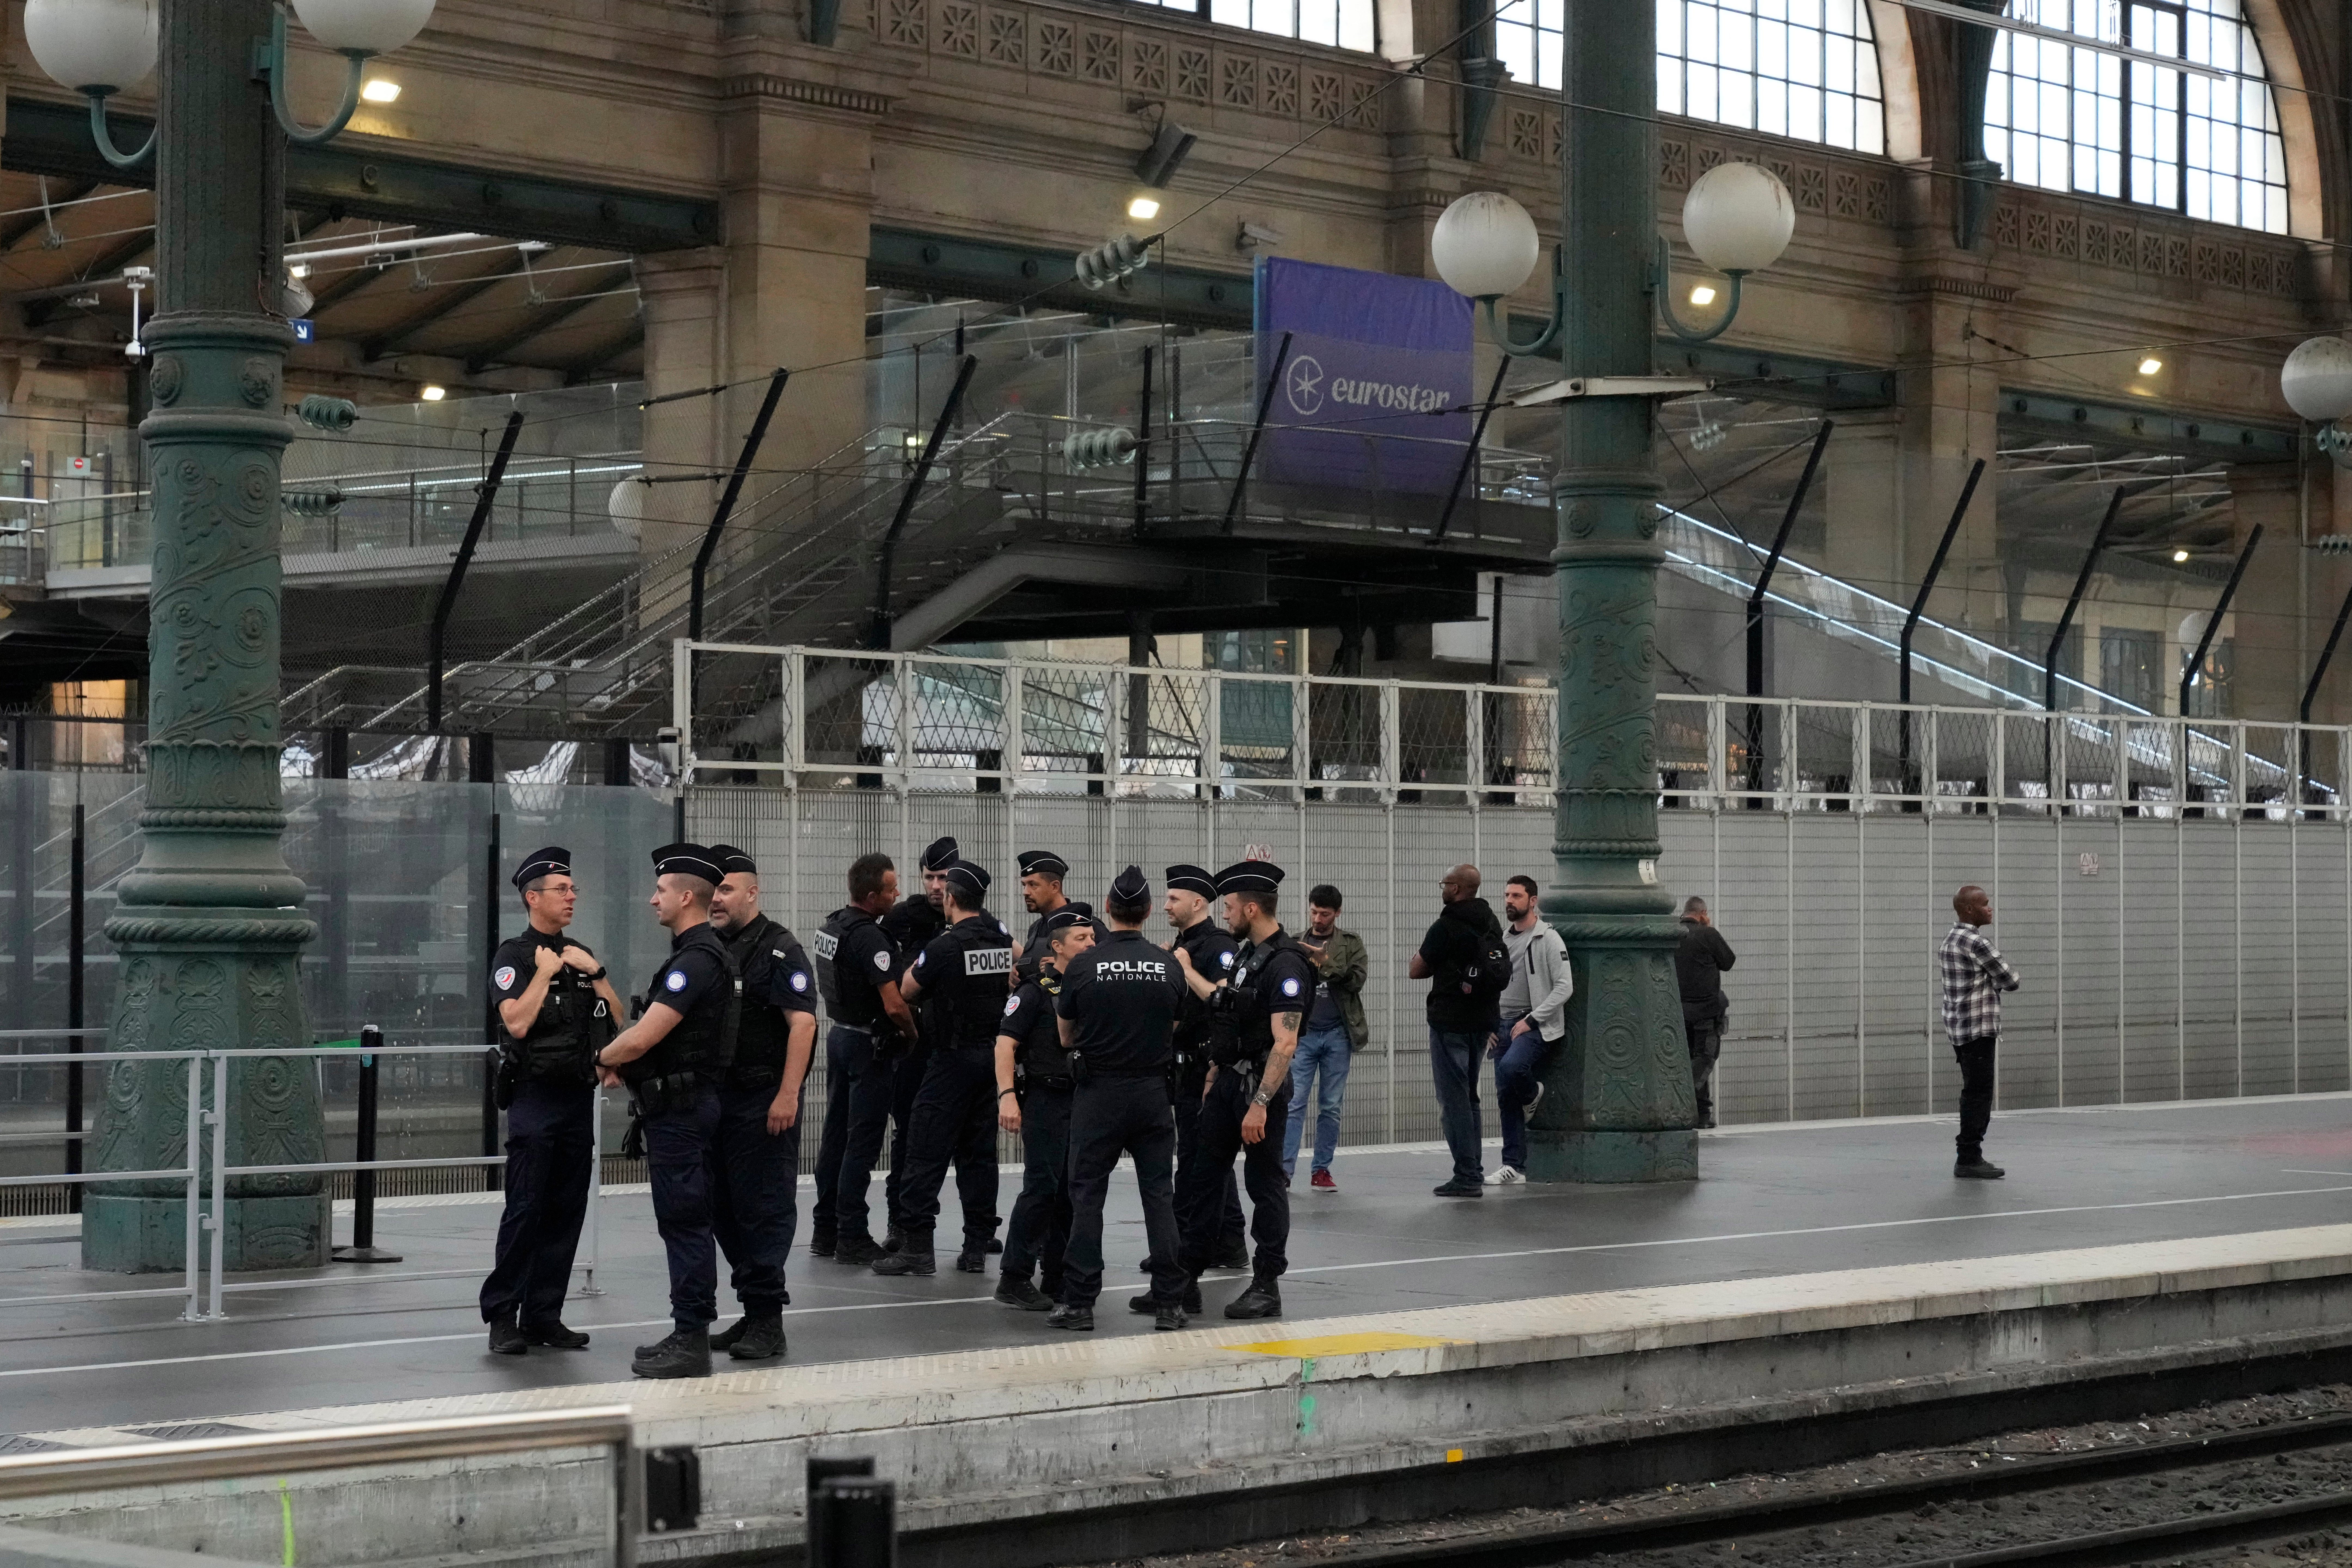 Police officers patrol inside the Gare du Nord train station following a coordinated ‘arson attack’ on France’s rail network